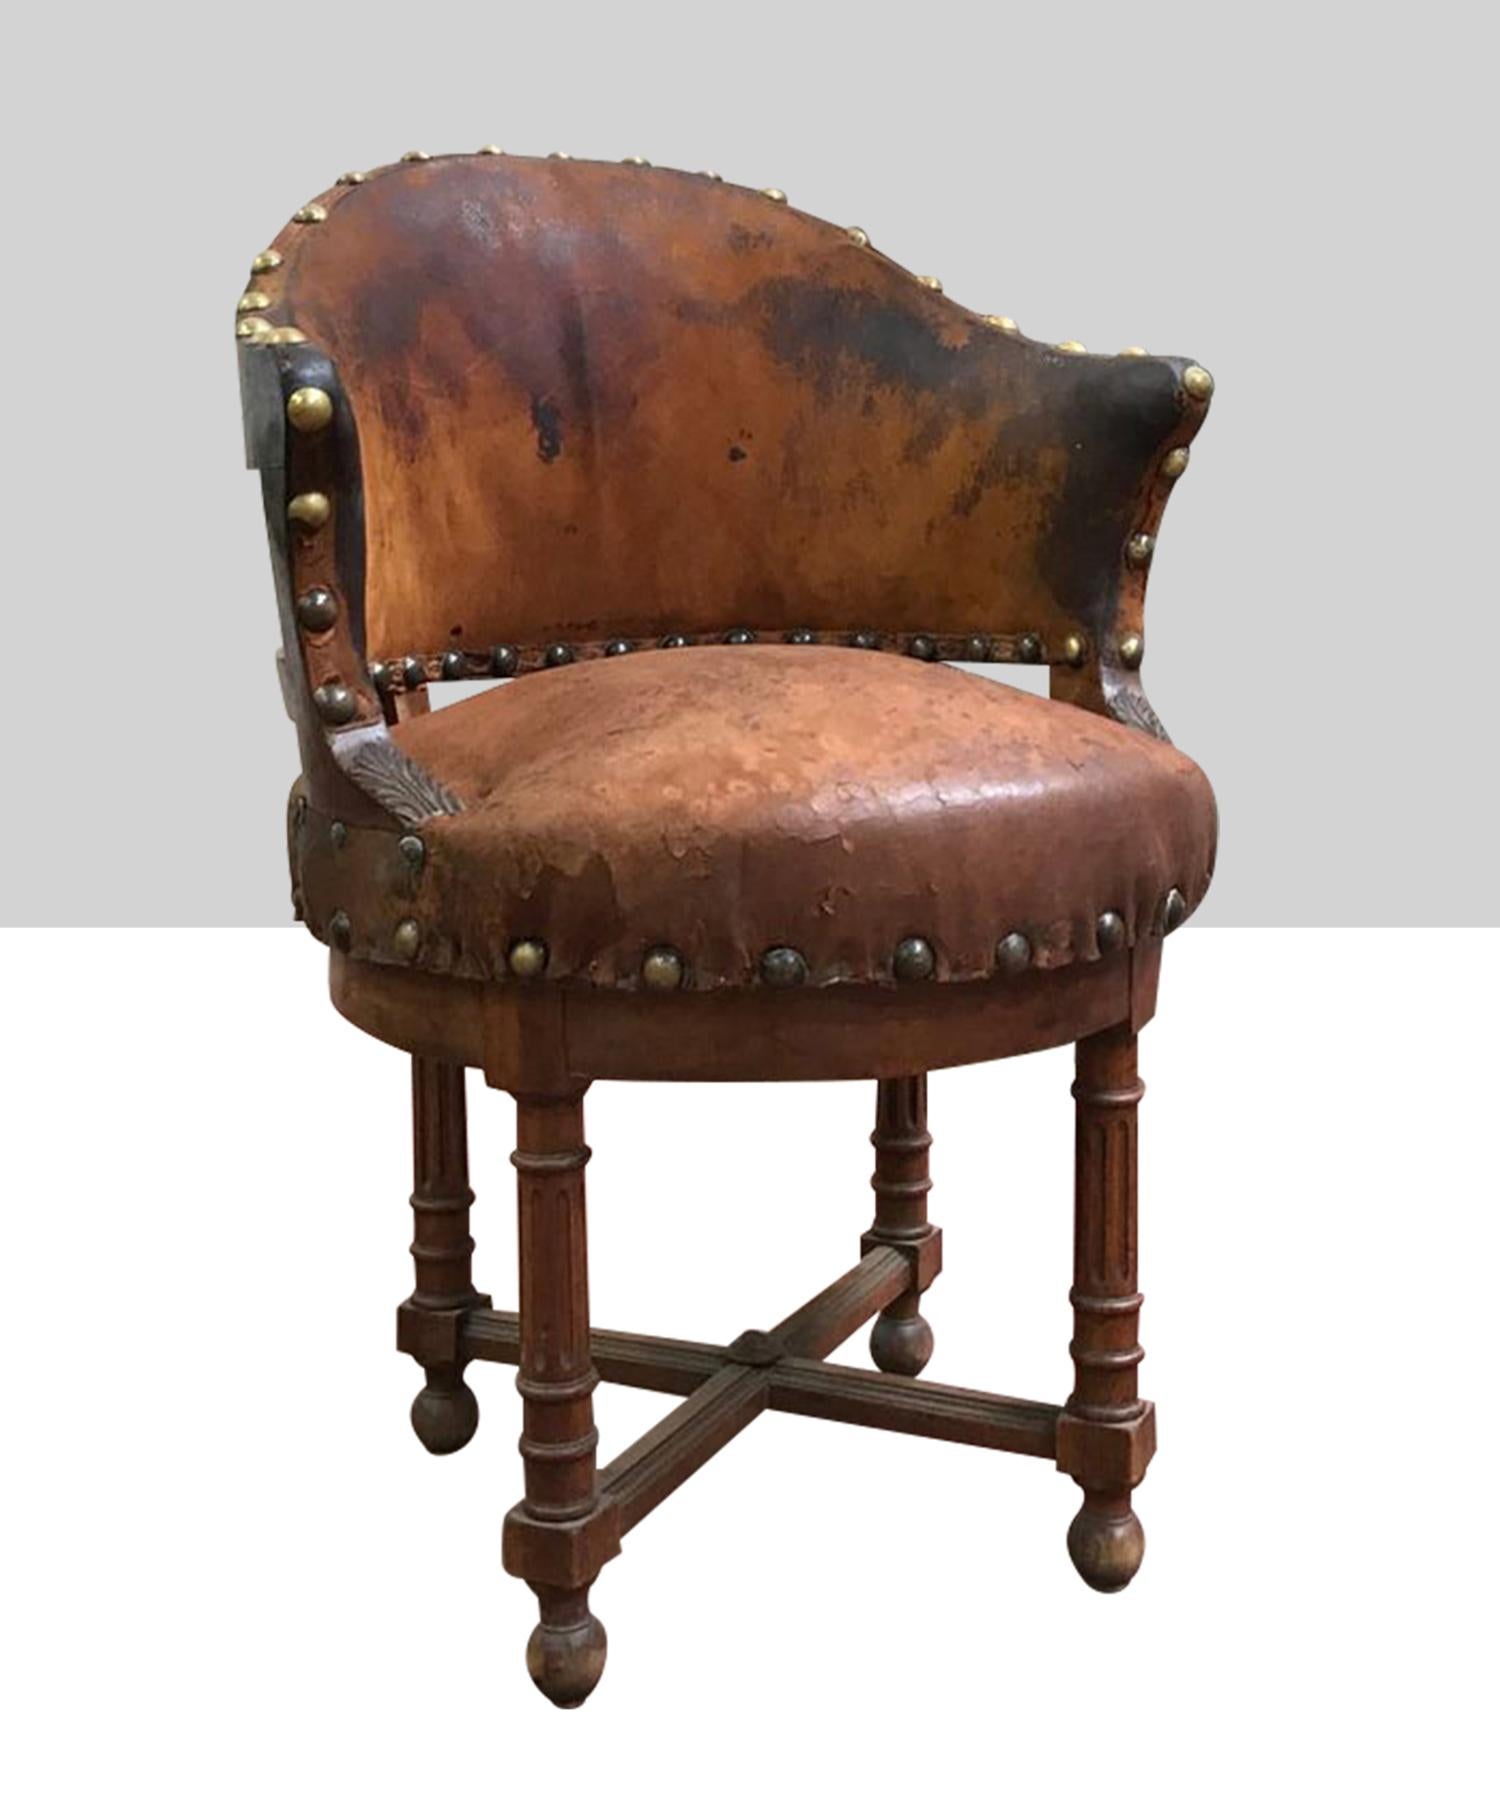 Original leather upholstery with beautiful patina, fitted with brass nails.
 
 